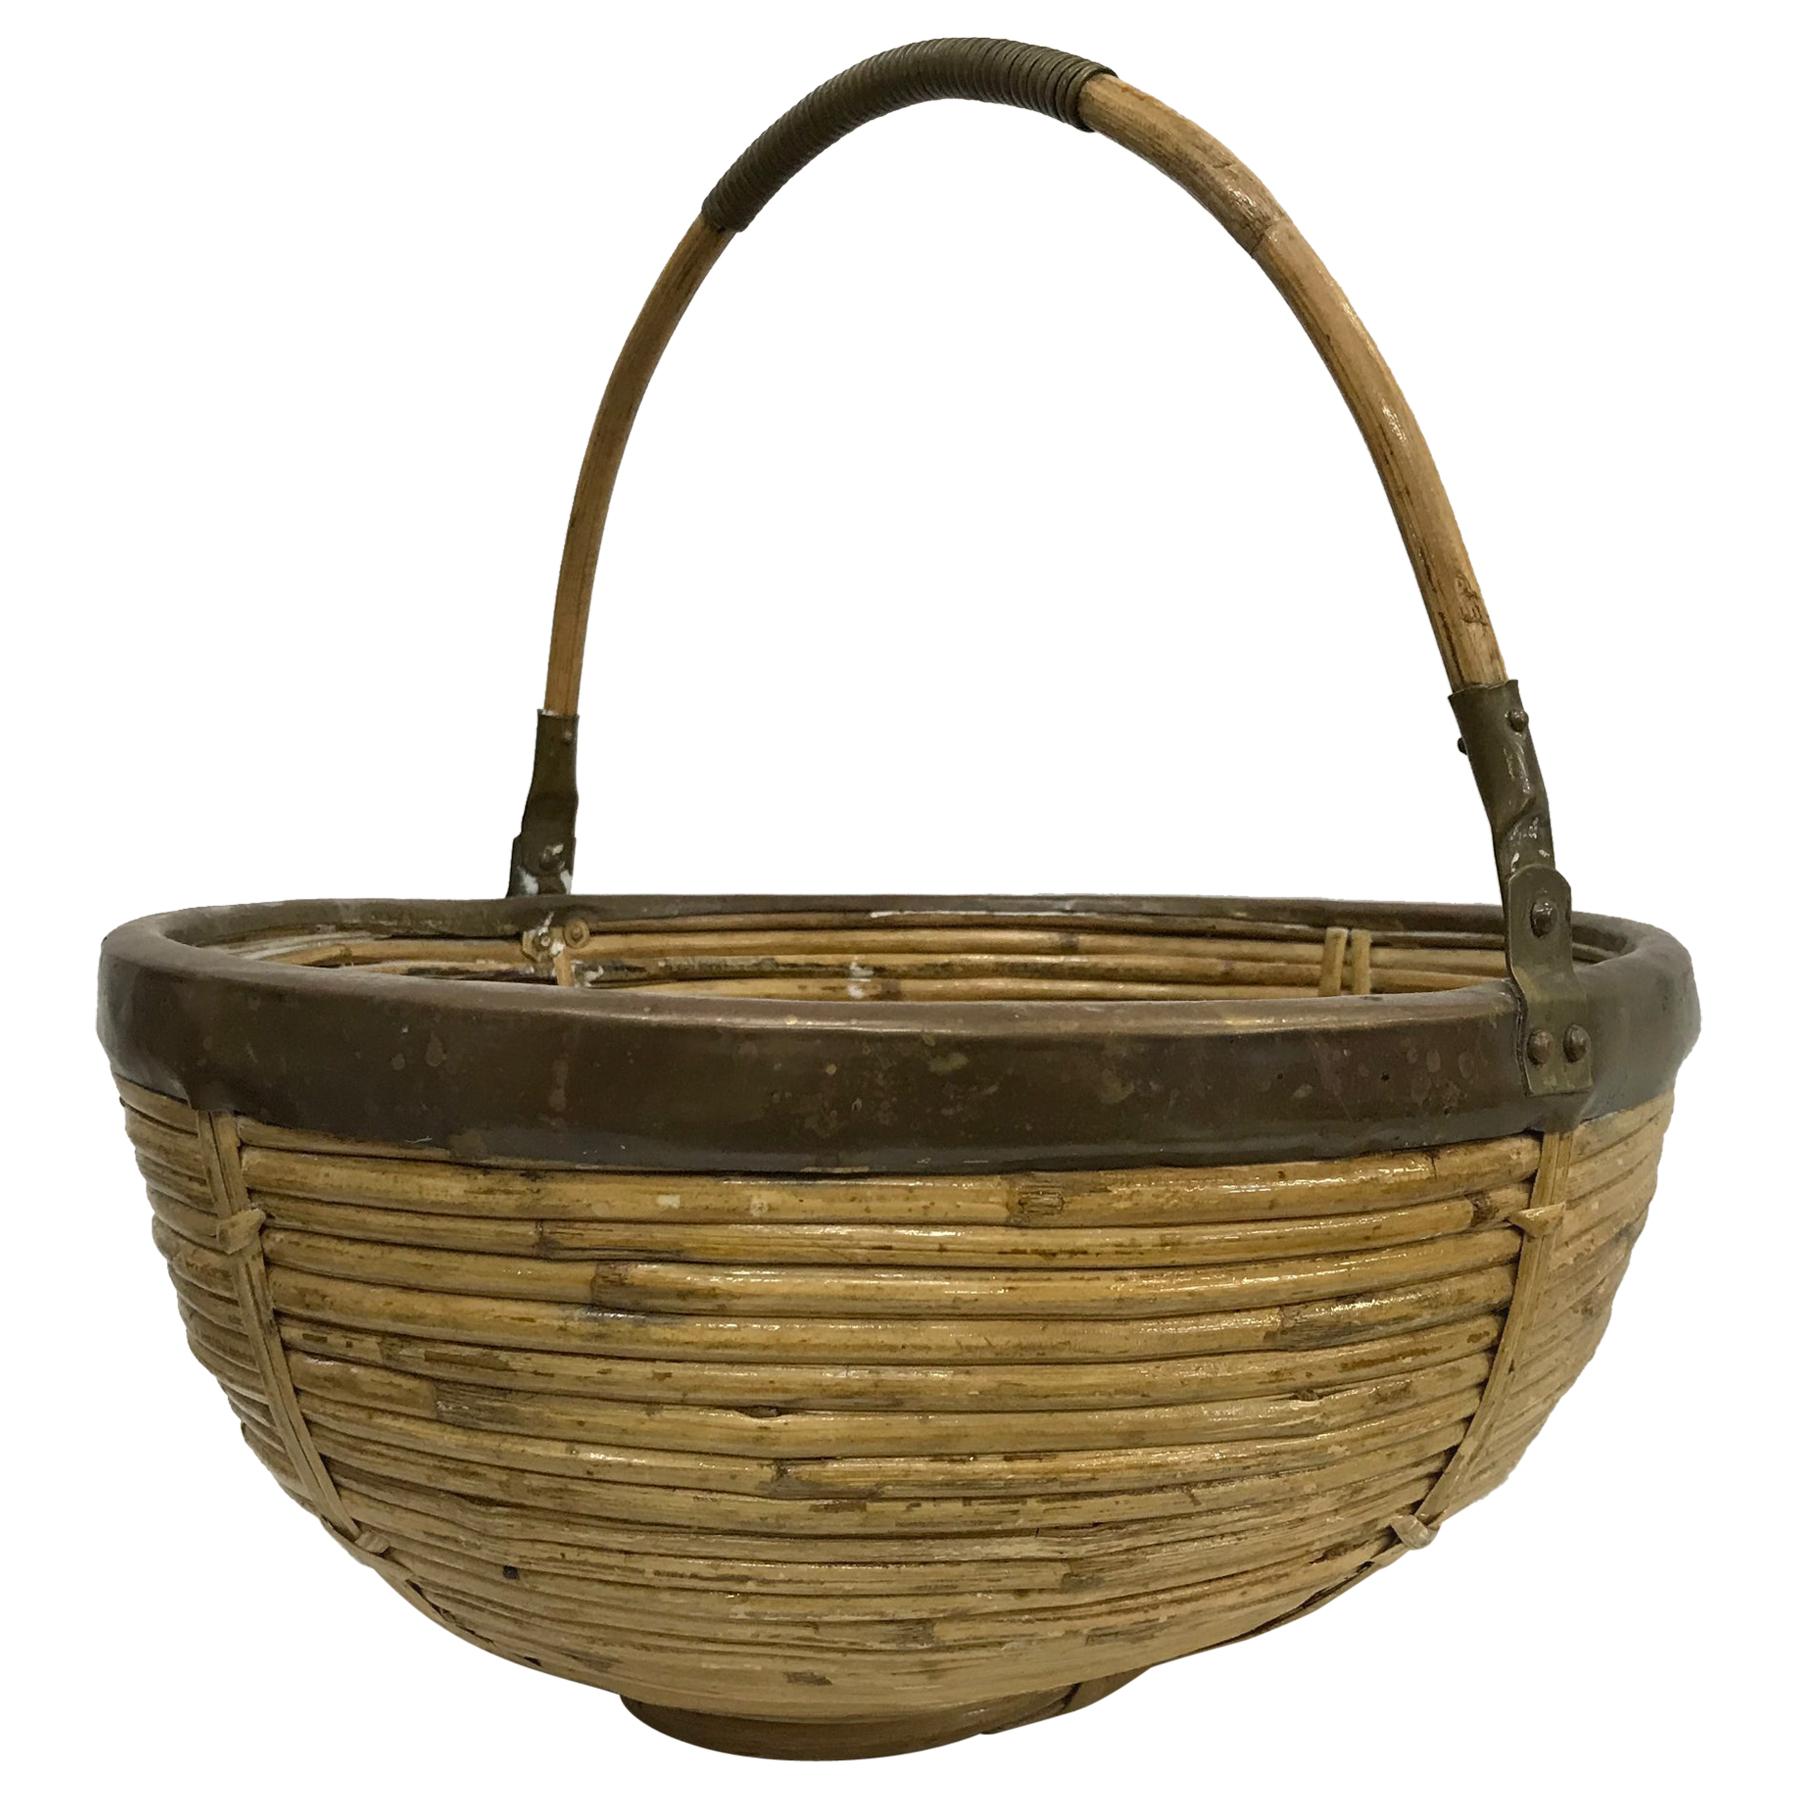 1960s Mexican Hand Carry Woven Wicker Cane Basket with Patinated Brass Trim